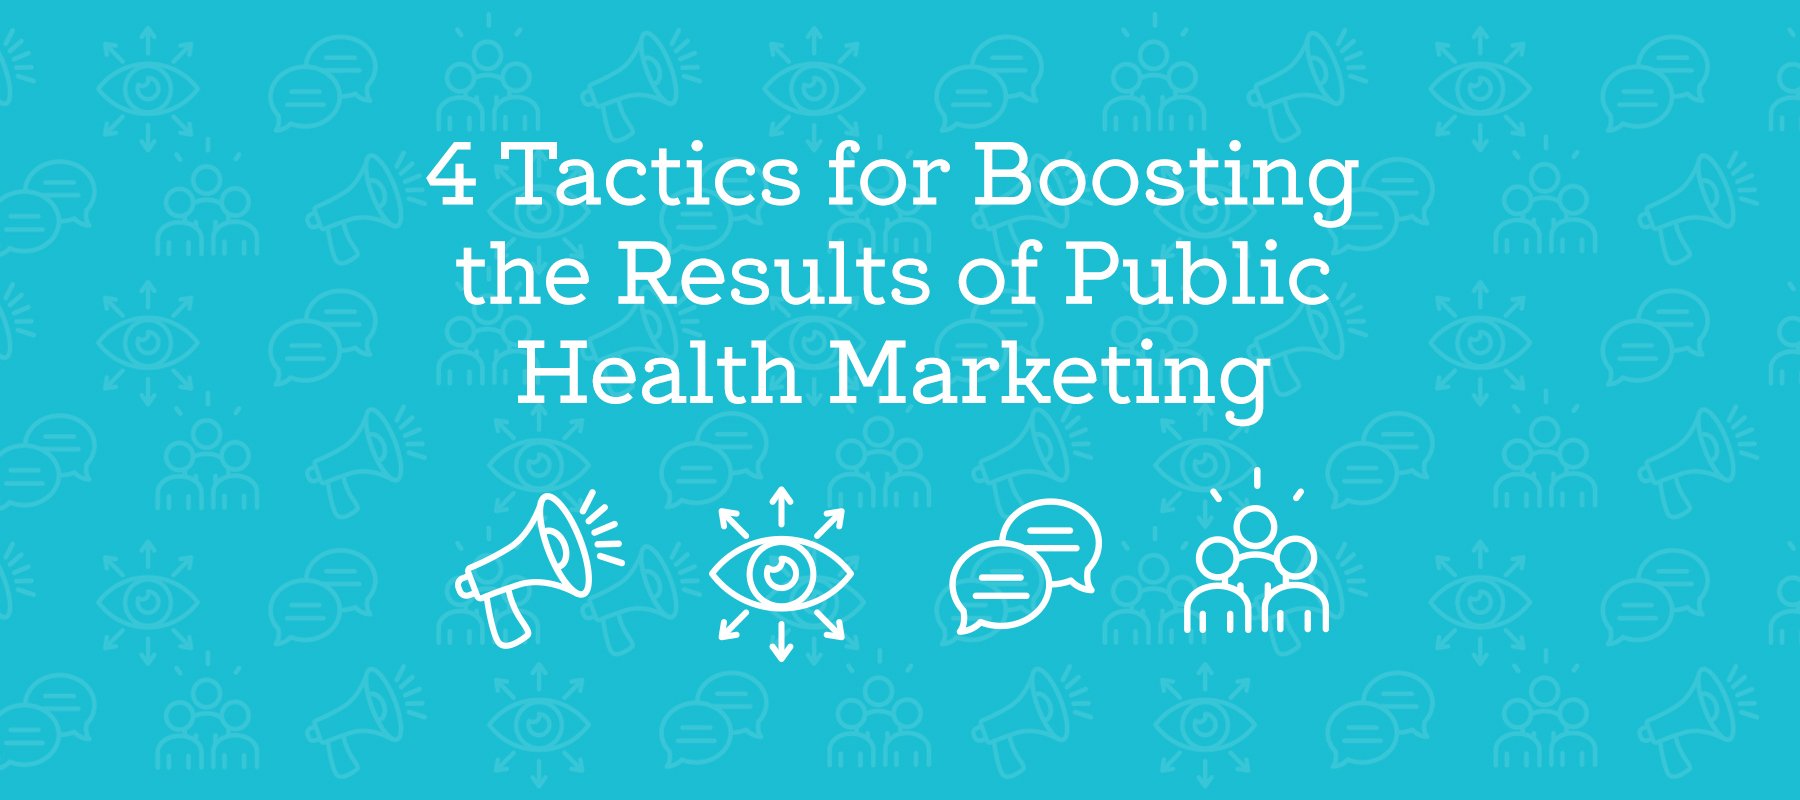 4 Tactics for Boosting the Results of Public Health Marketing